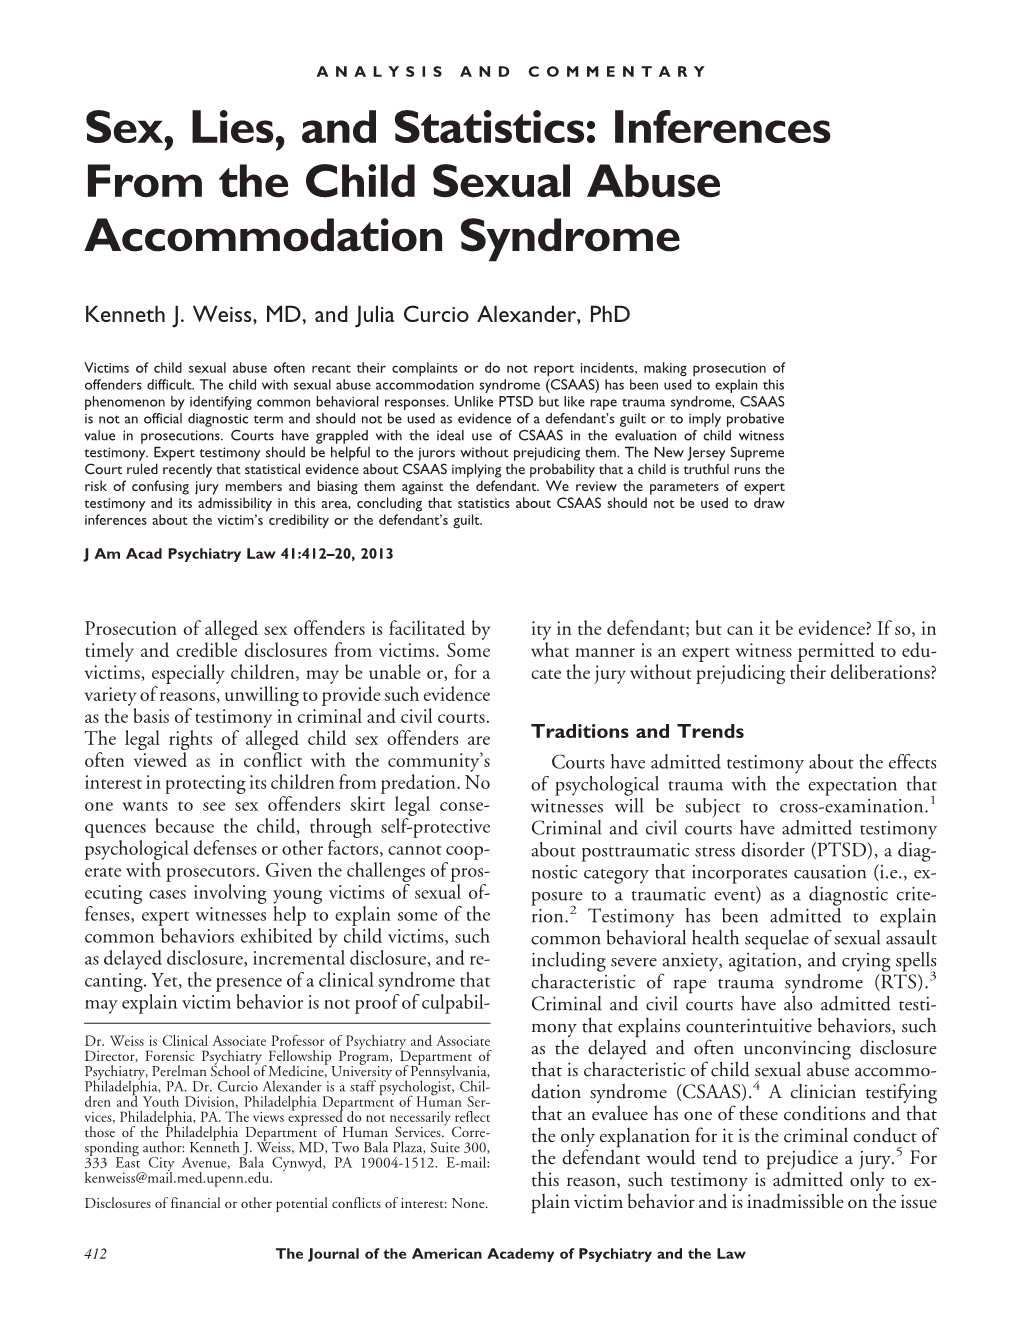 Inferences from the Child Sexual Abuse Accommodation Syndrome